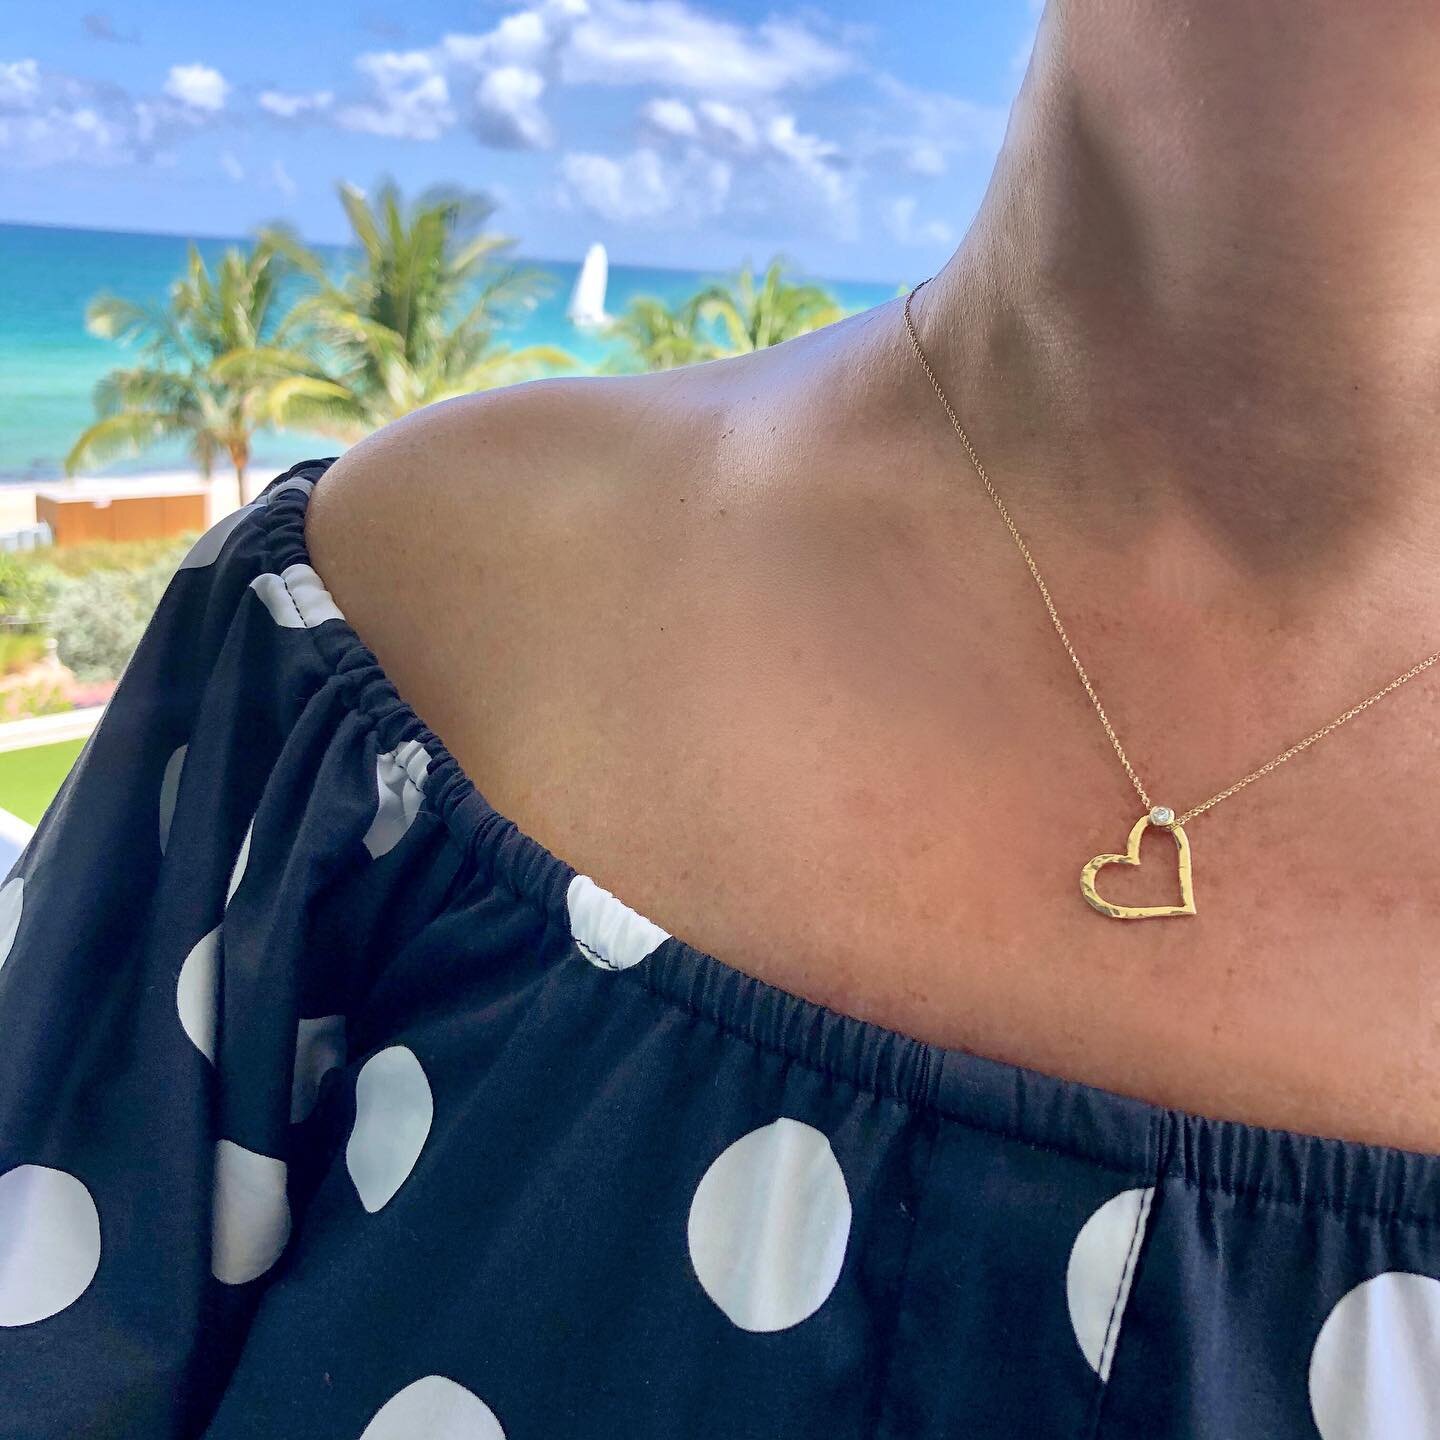 It&rsquo;s Friday, I&rsquo;m in love... #heart #charm with #diamond on #sparkle chain ❤️✨
.
.
.
.
.
#valentines #jewelry #sayitingold #fridayiminlove #thecure #heartnecklace #heartjewelry #diamondnecklace #gold #jewellery #jotd #lotd #handmade #finej